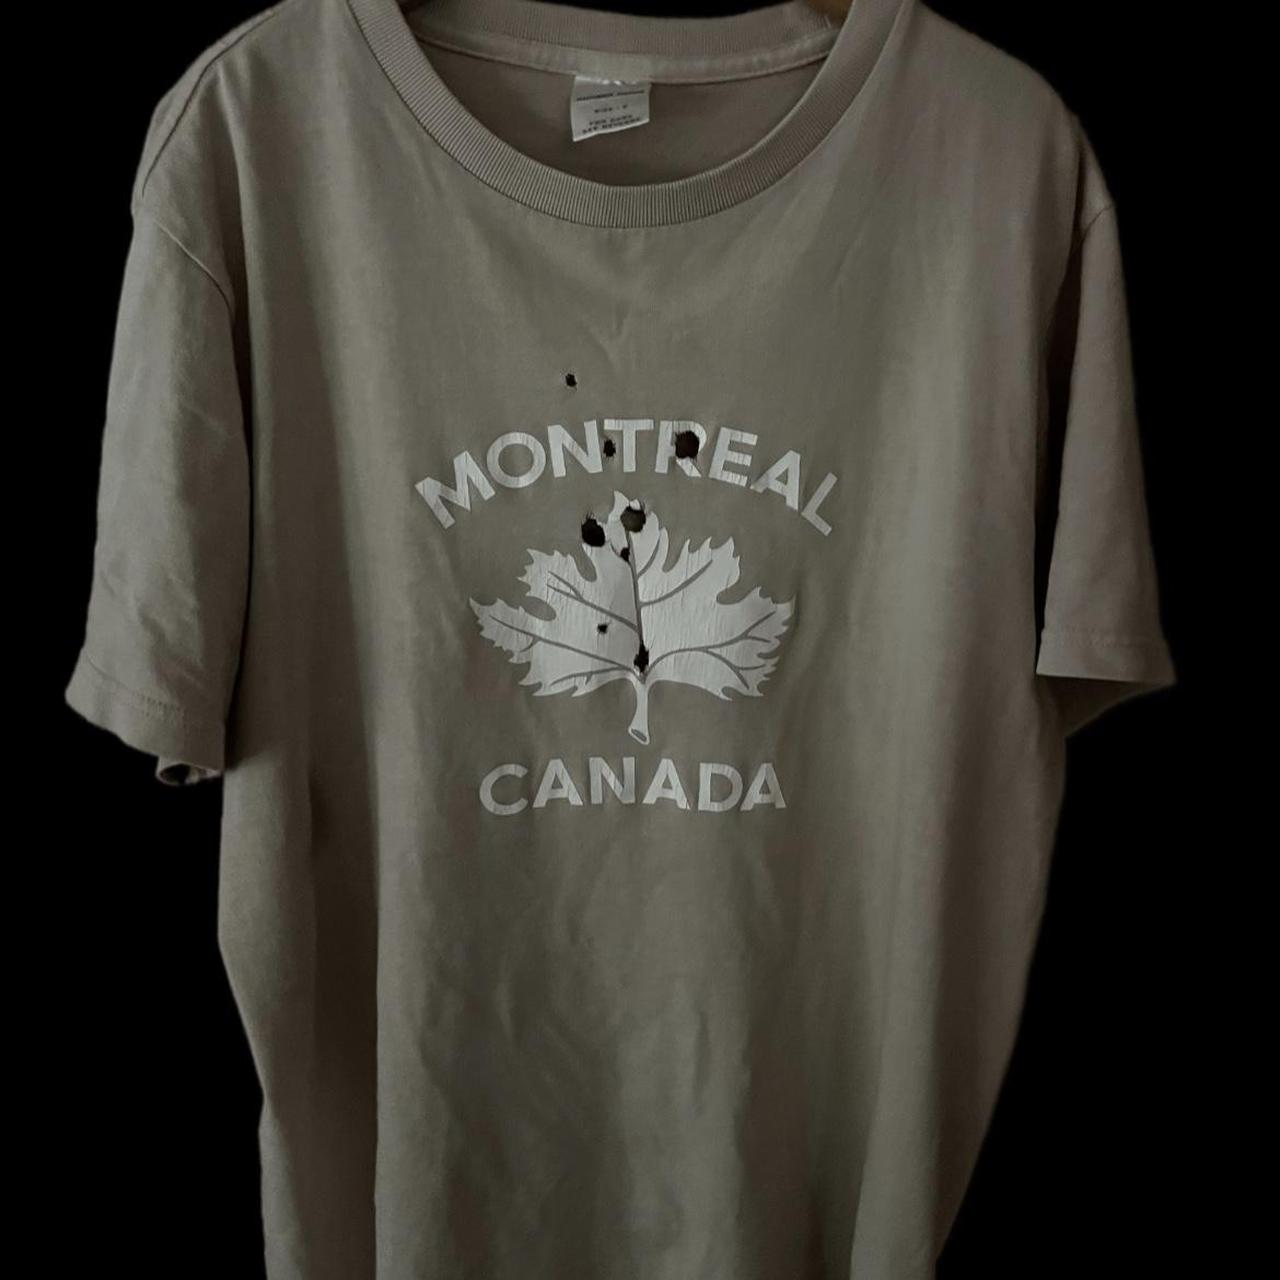 Number Nine “Montreal Canada” Tee - SS01